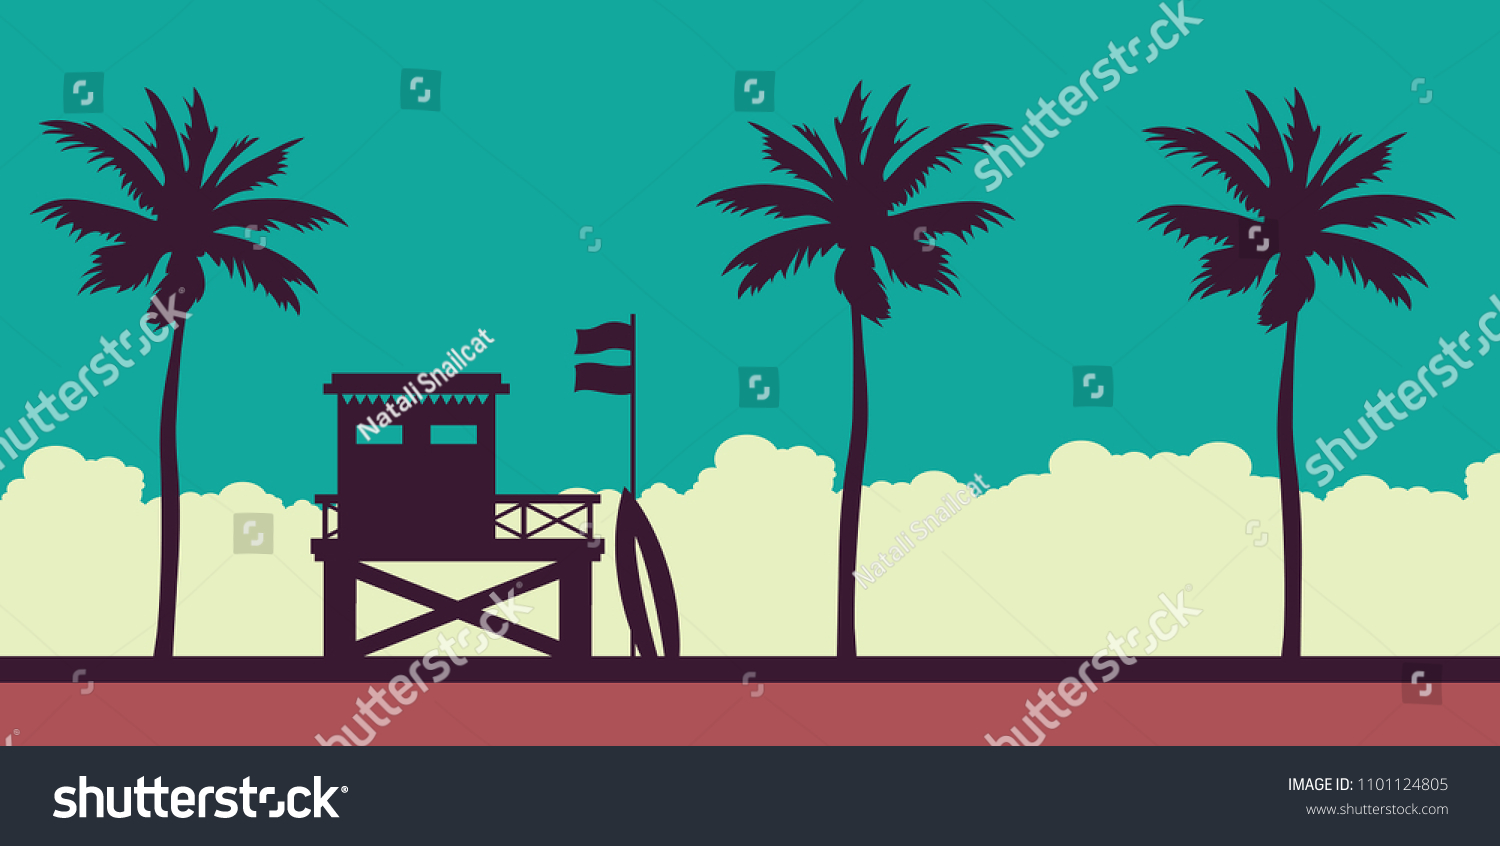 SVG of Lifeguard station on a beach with palm on a sunset sky. Vector illustration with tropical landscape. Summer card. svg